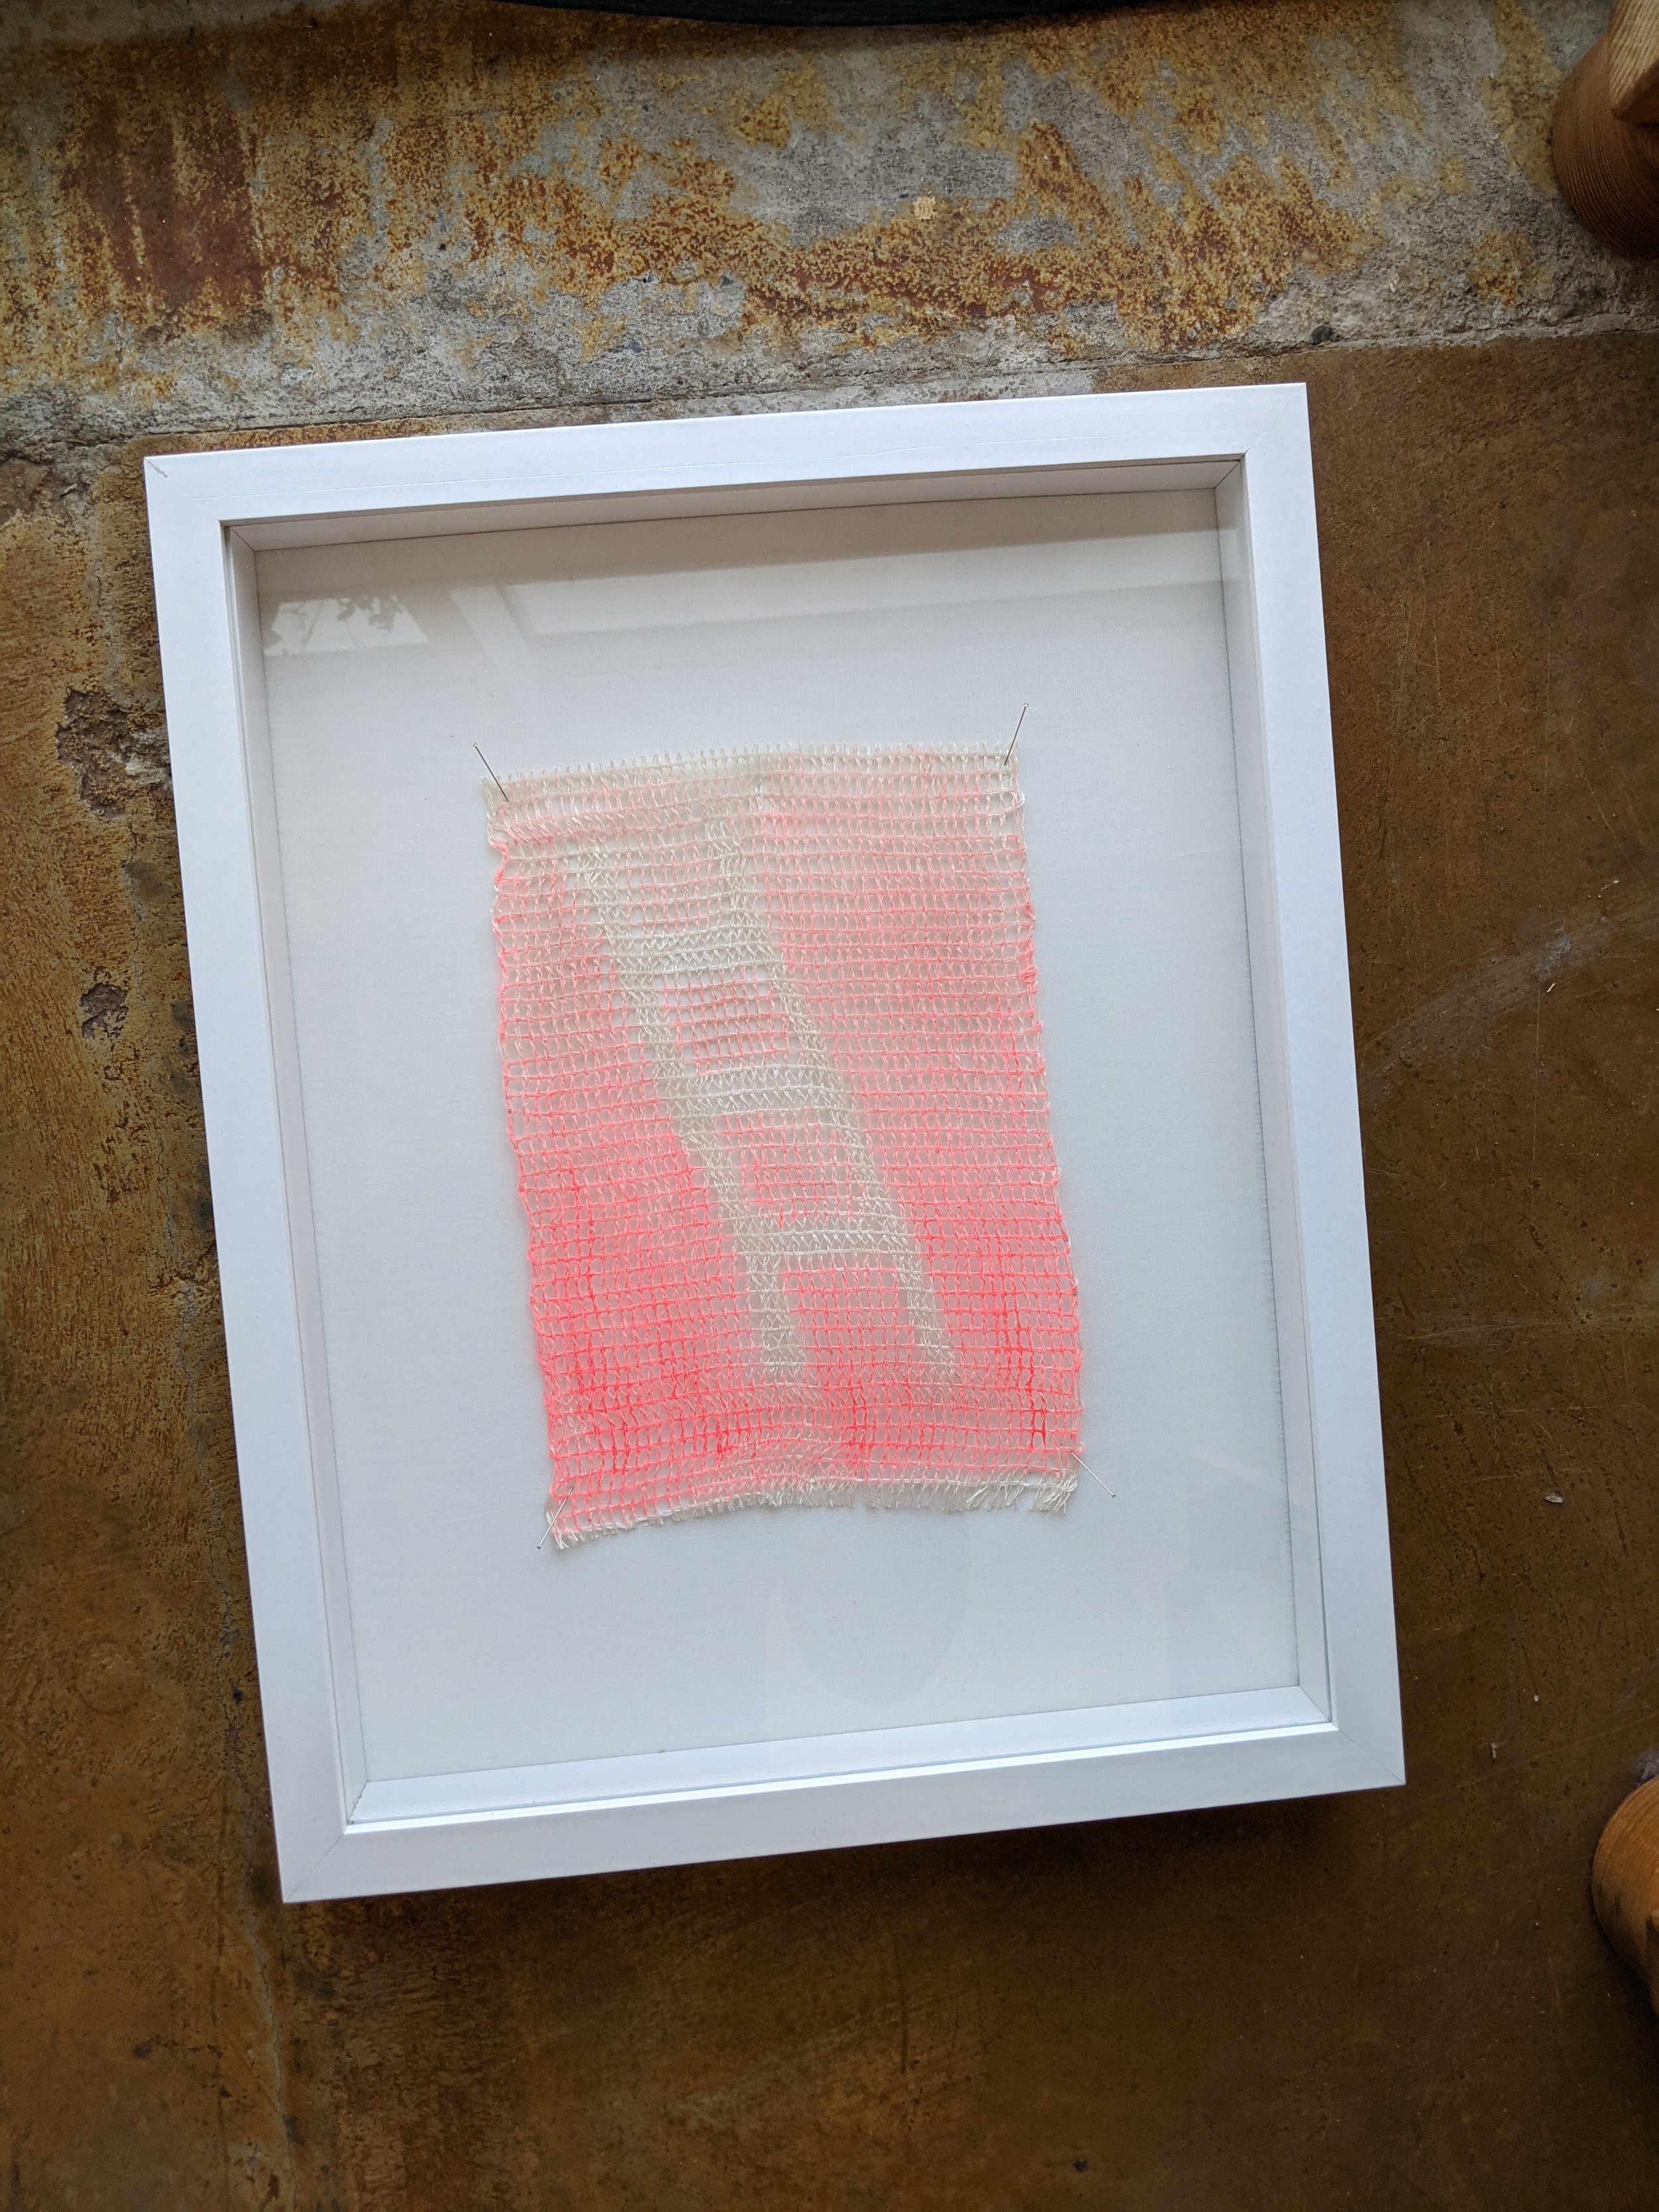  ladder (fire) hand woven gauze; linen and gouache 8 in x 6 in (frame 15 in x 12 in) 2020 